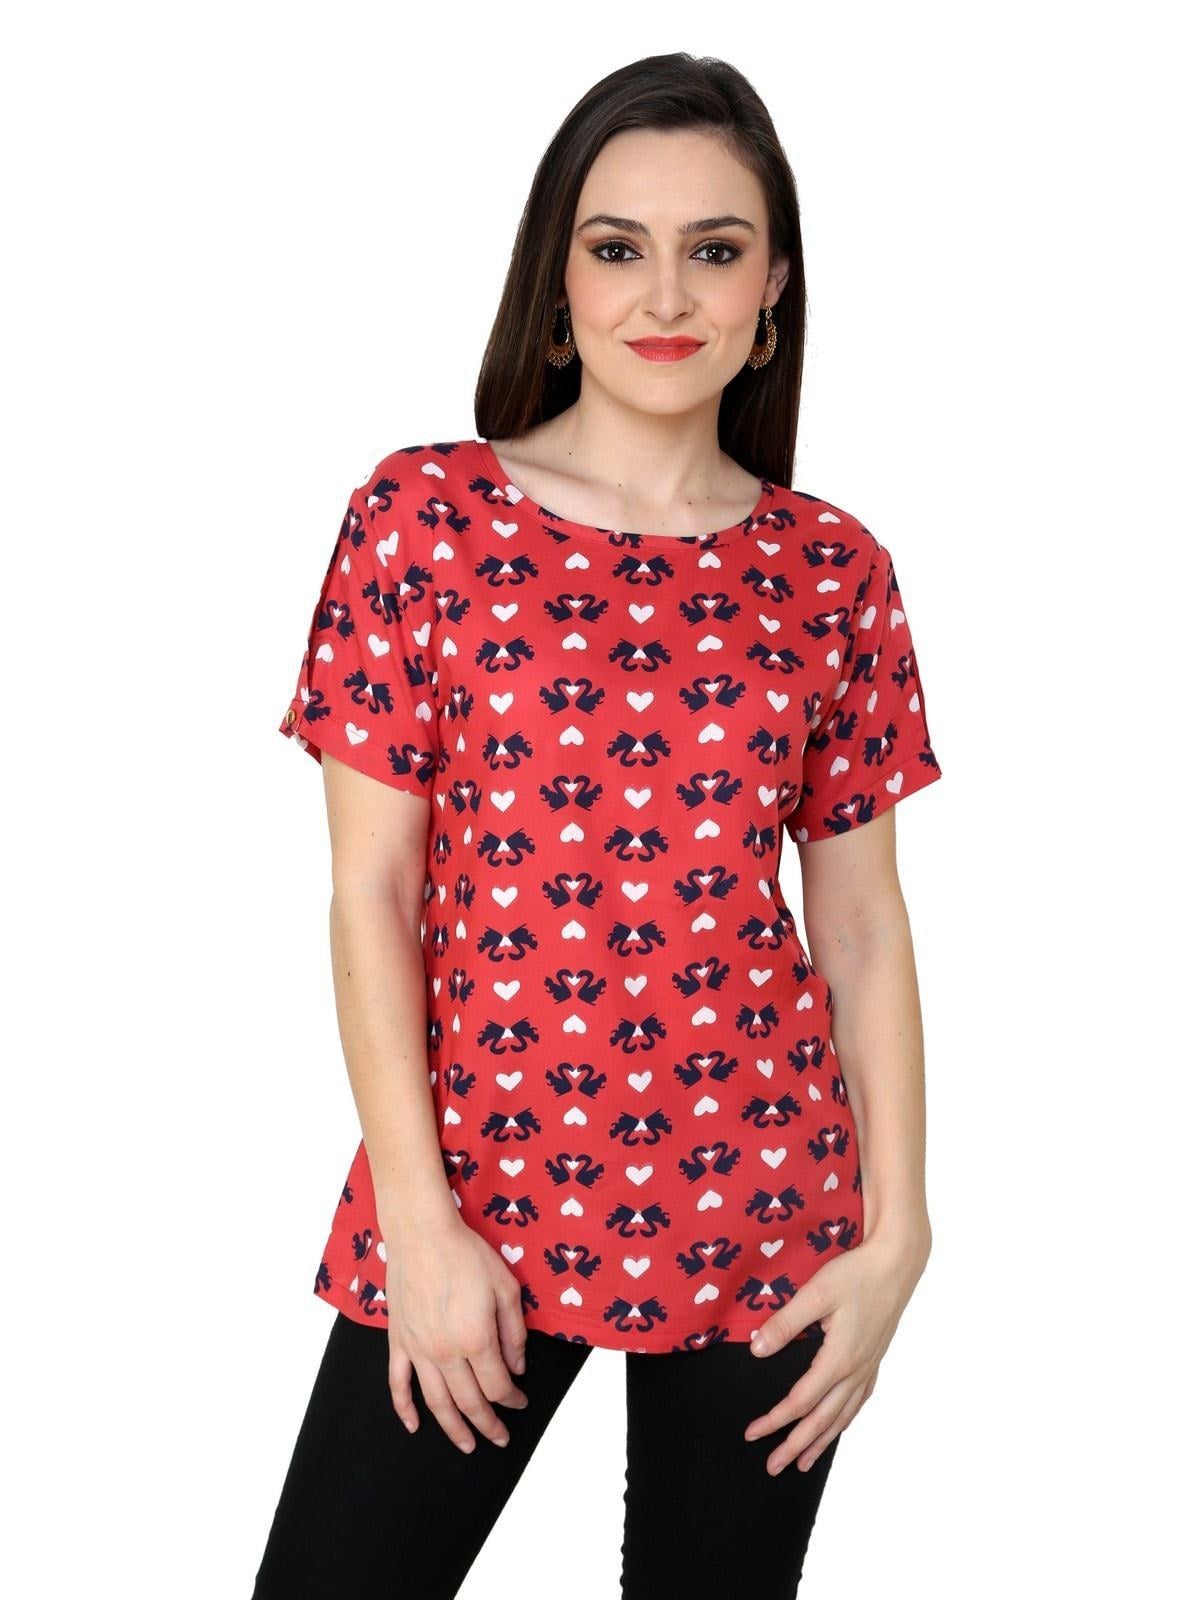 Women's Coral Printed Top - Pannkh